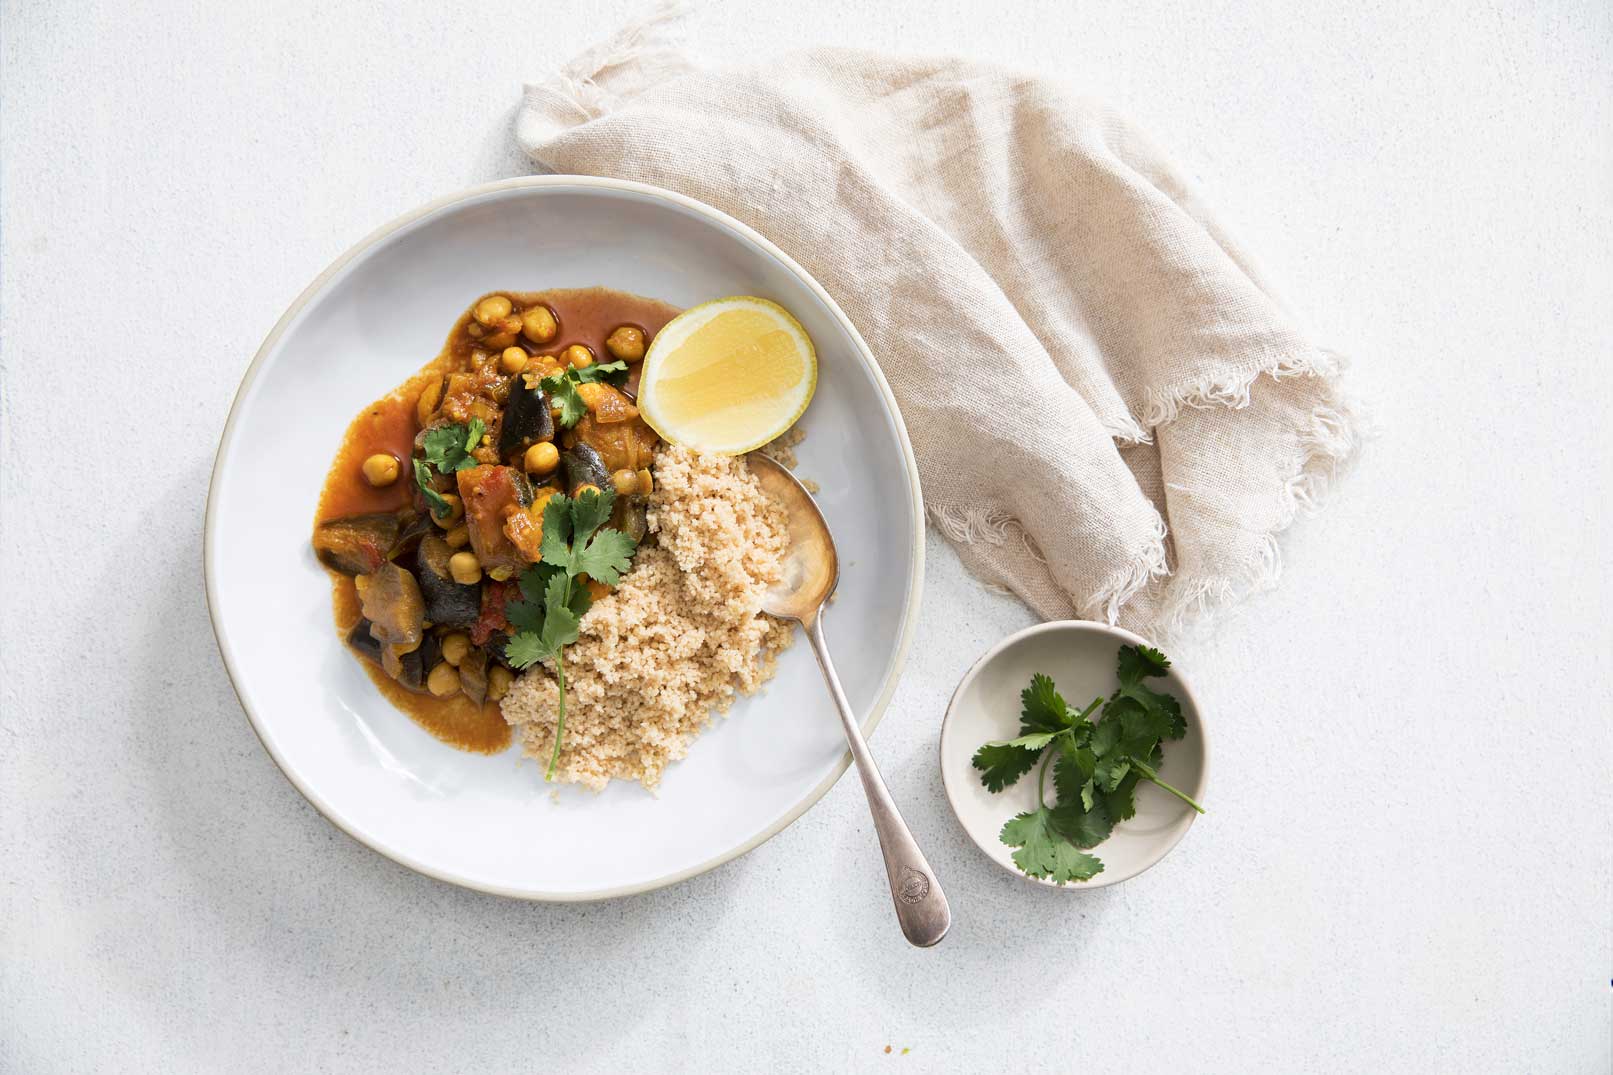 Eggplant tagine in a large white bowl with couscous, half a lemon and a silver spoon. A small bowl of coriander and a cloth napkin on the side for serving.